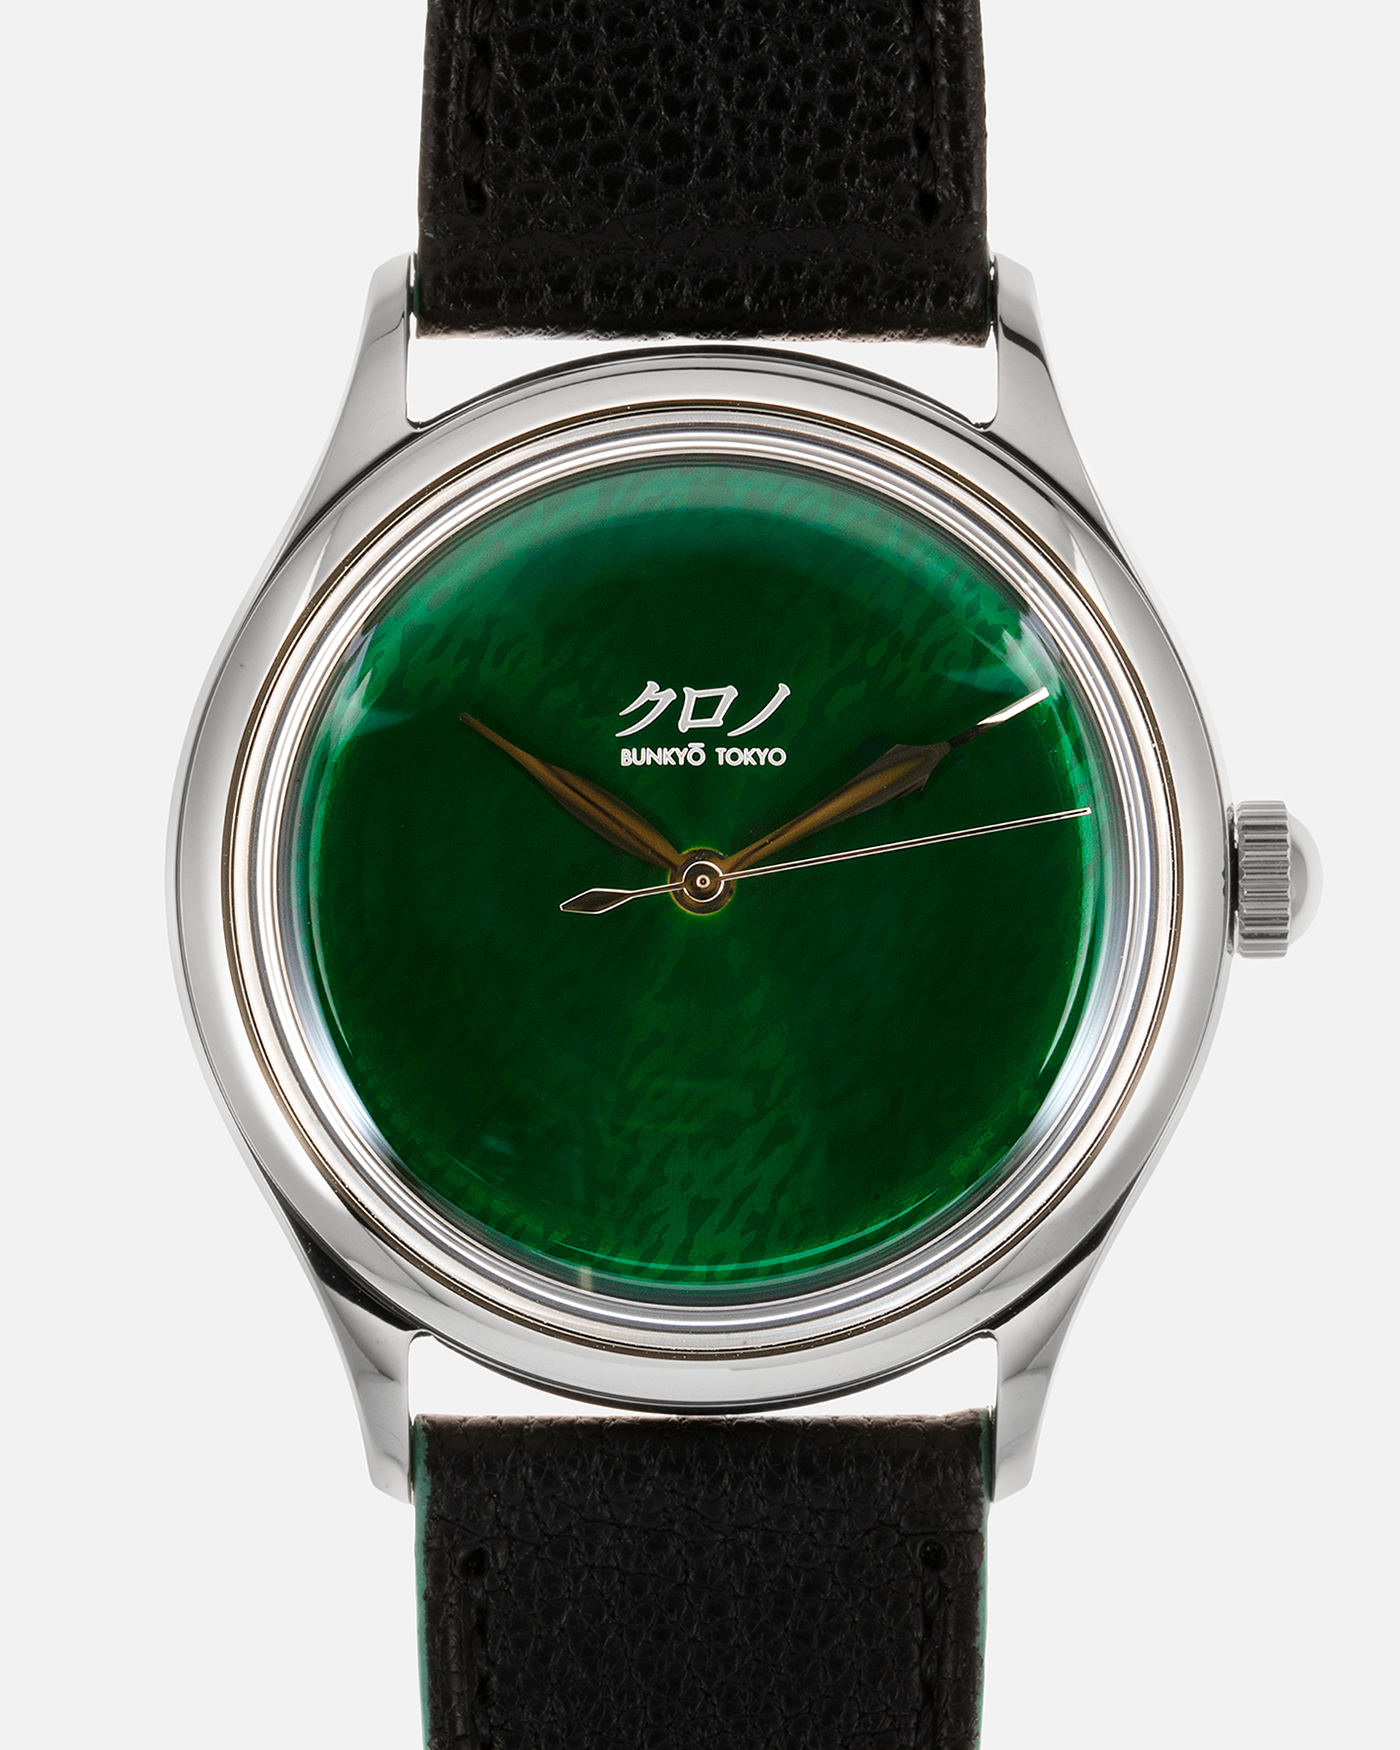 Brand: Kurono Tokyo Year: 2022 Model: Grand Urushi Aoyama (Set of 3), Limited Edition of 188 pieces each Material: Stainless Steel Case, Urushi Lacquer Dial Movement: Miyota 90S5, Self-Winding Case Diameter: 37mm Strap: Kurono Black Calf Leather Straps with Red / Green / Black Embellished Sides and Stainless Steel Tang Buckles